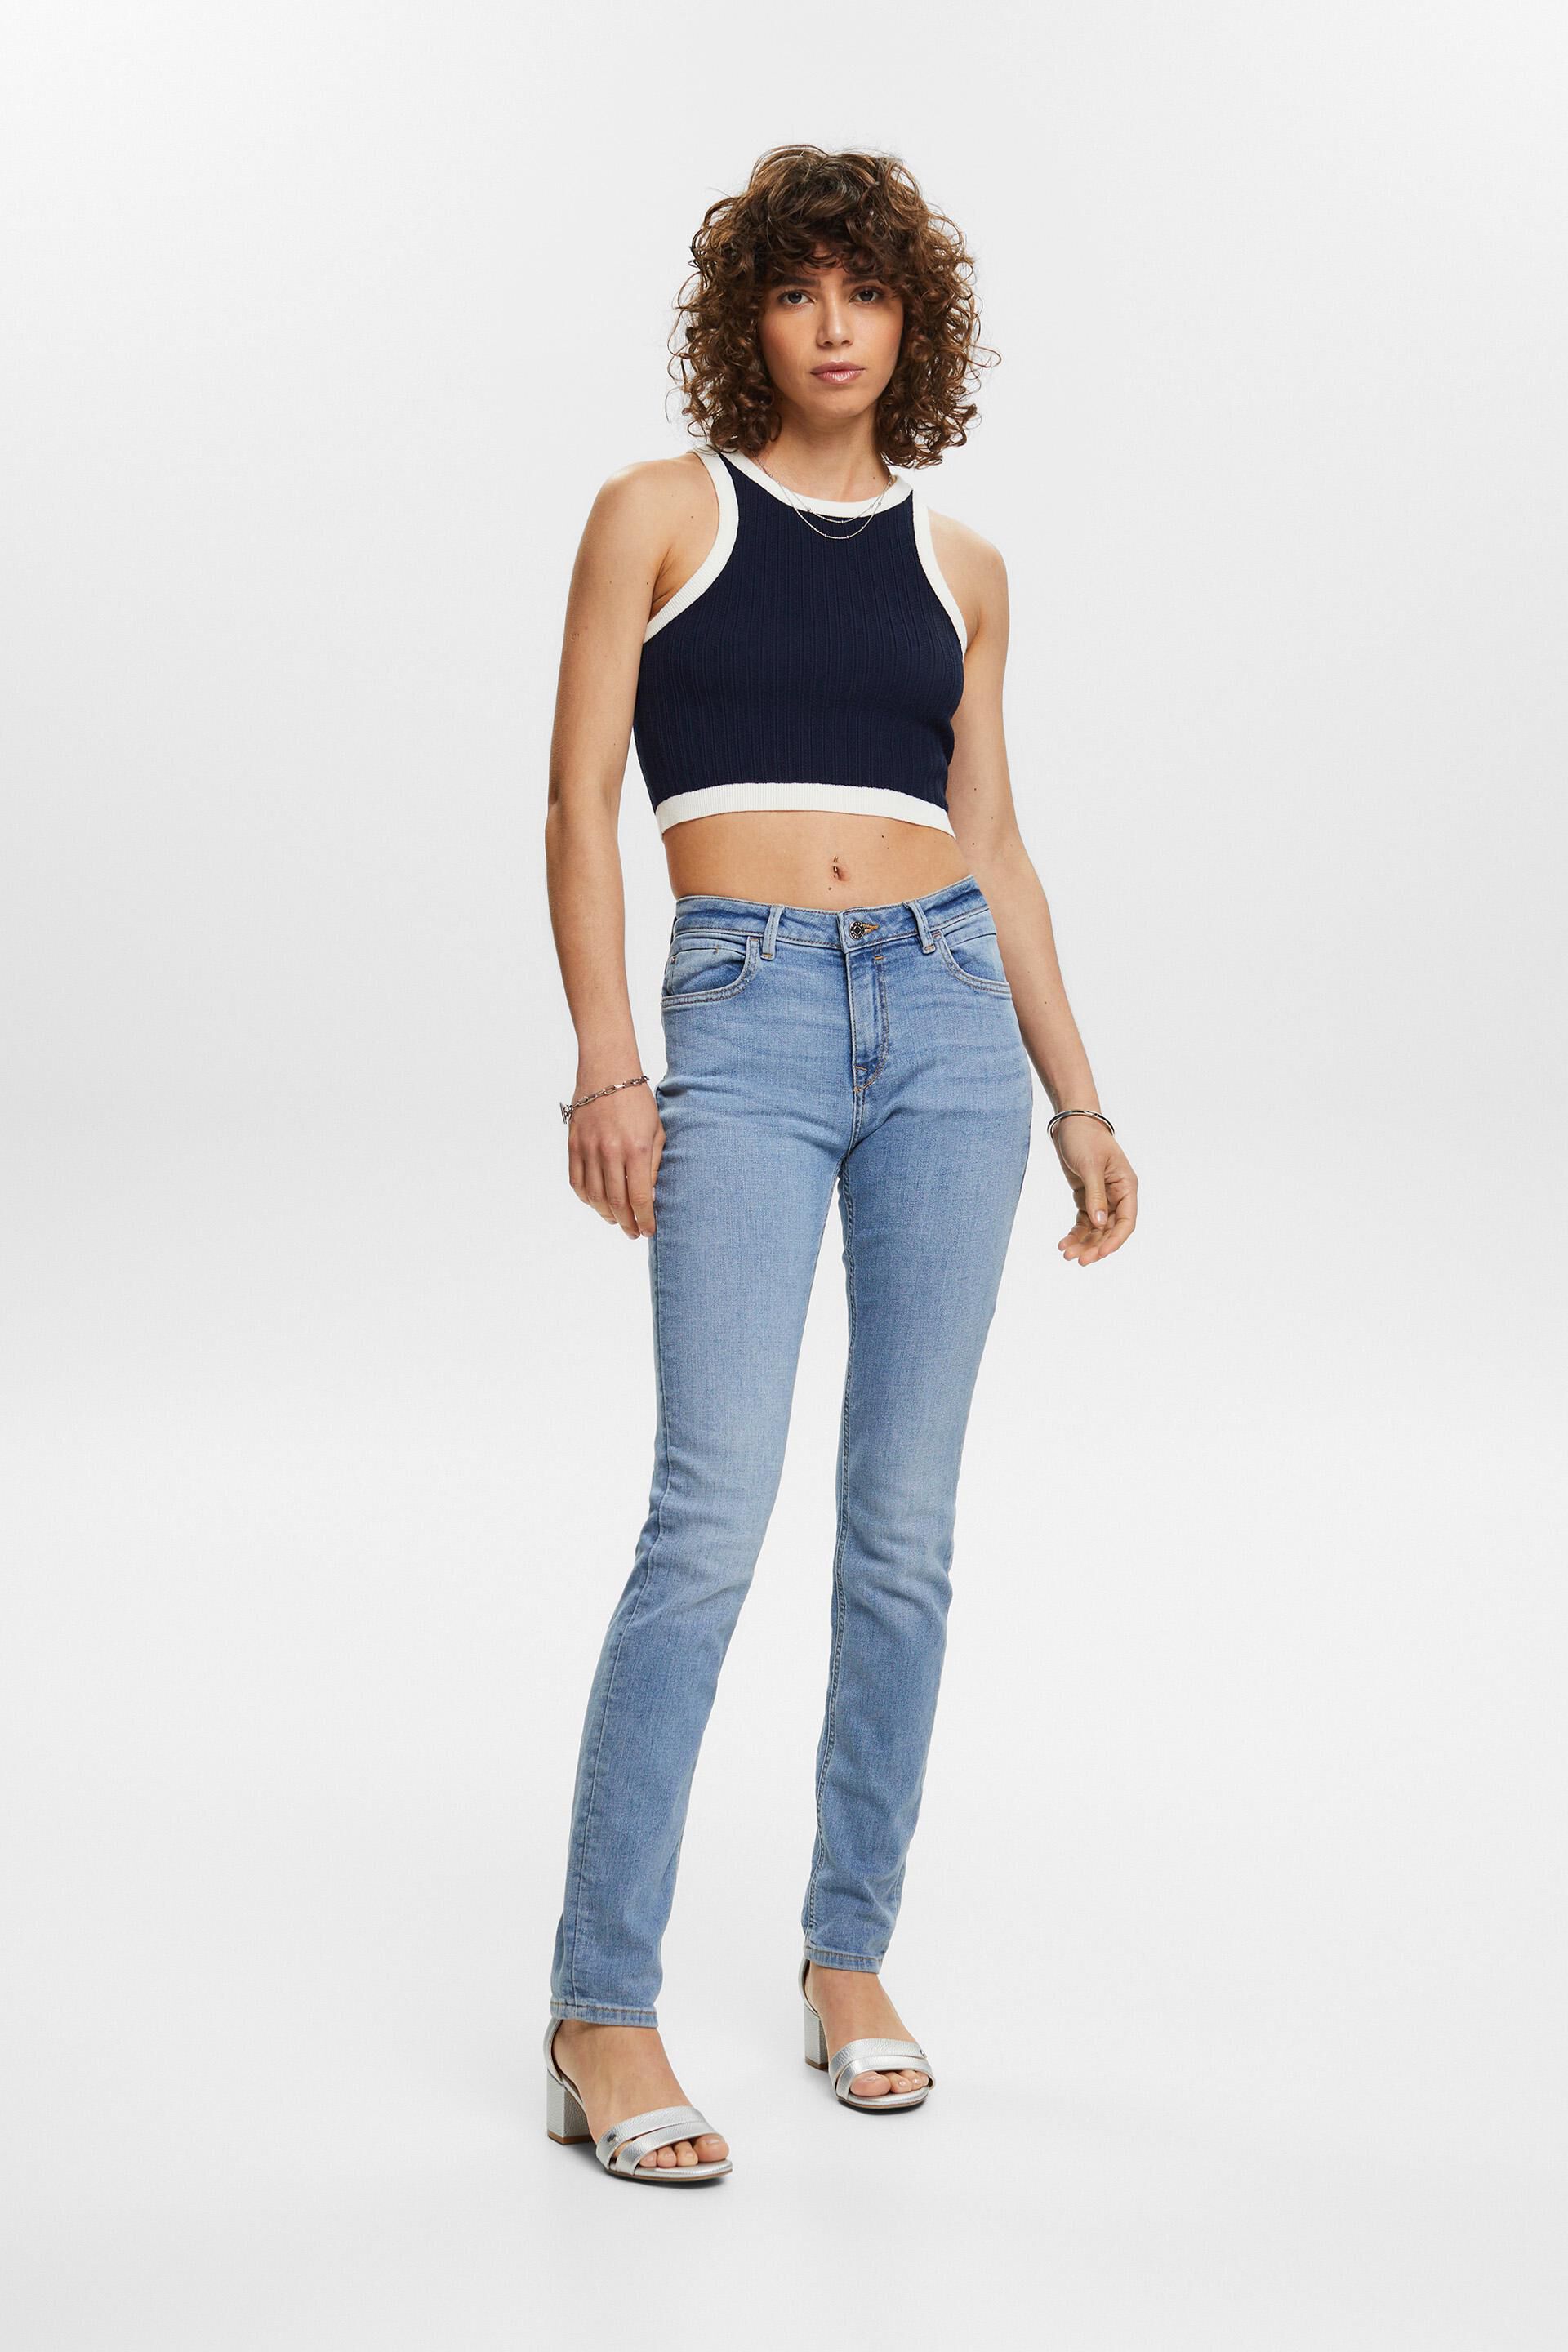 ESPRIT - Stretch jeans in organic cotton at our online shop